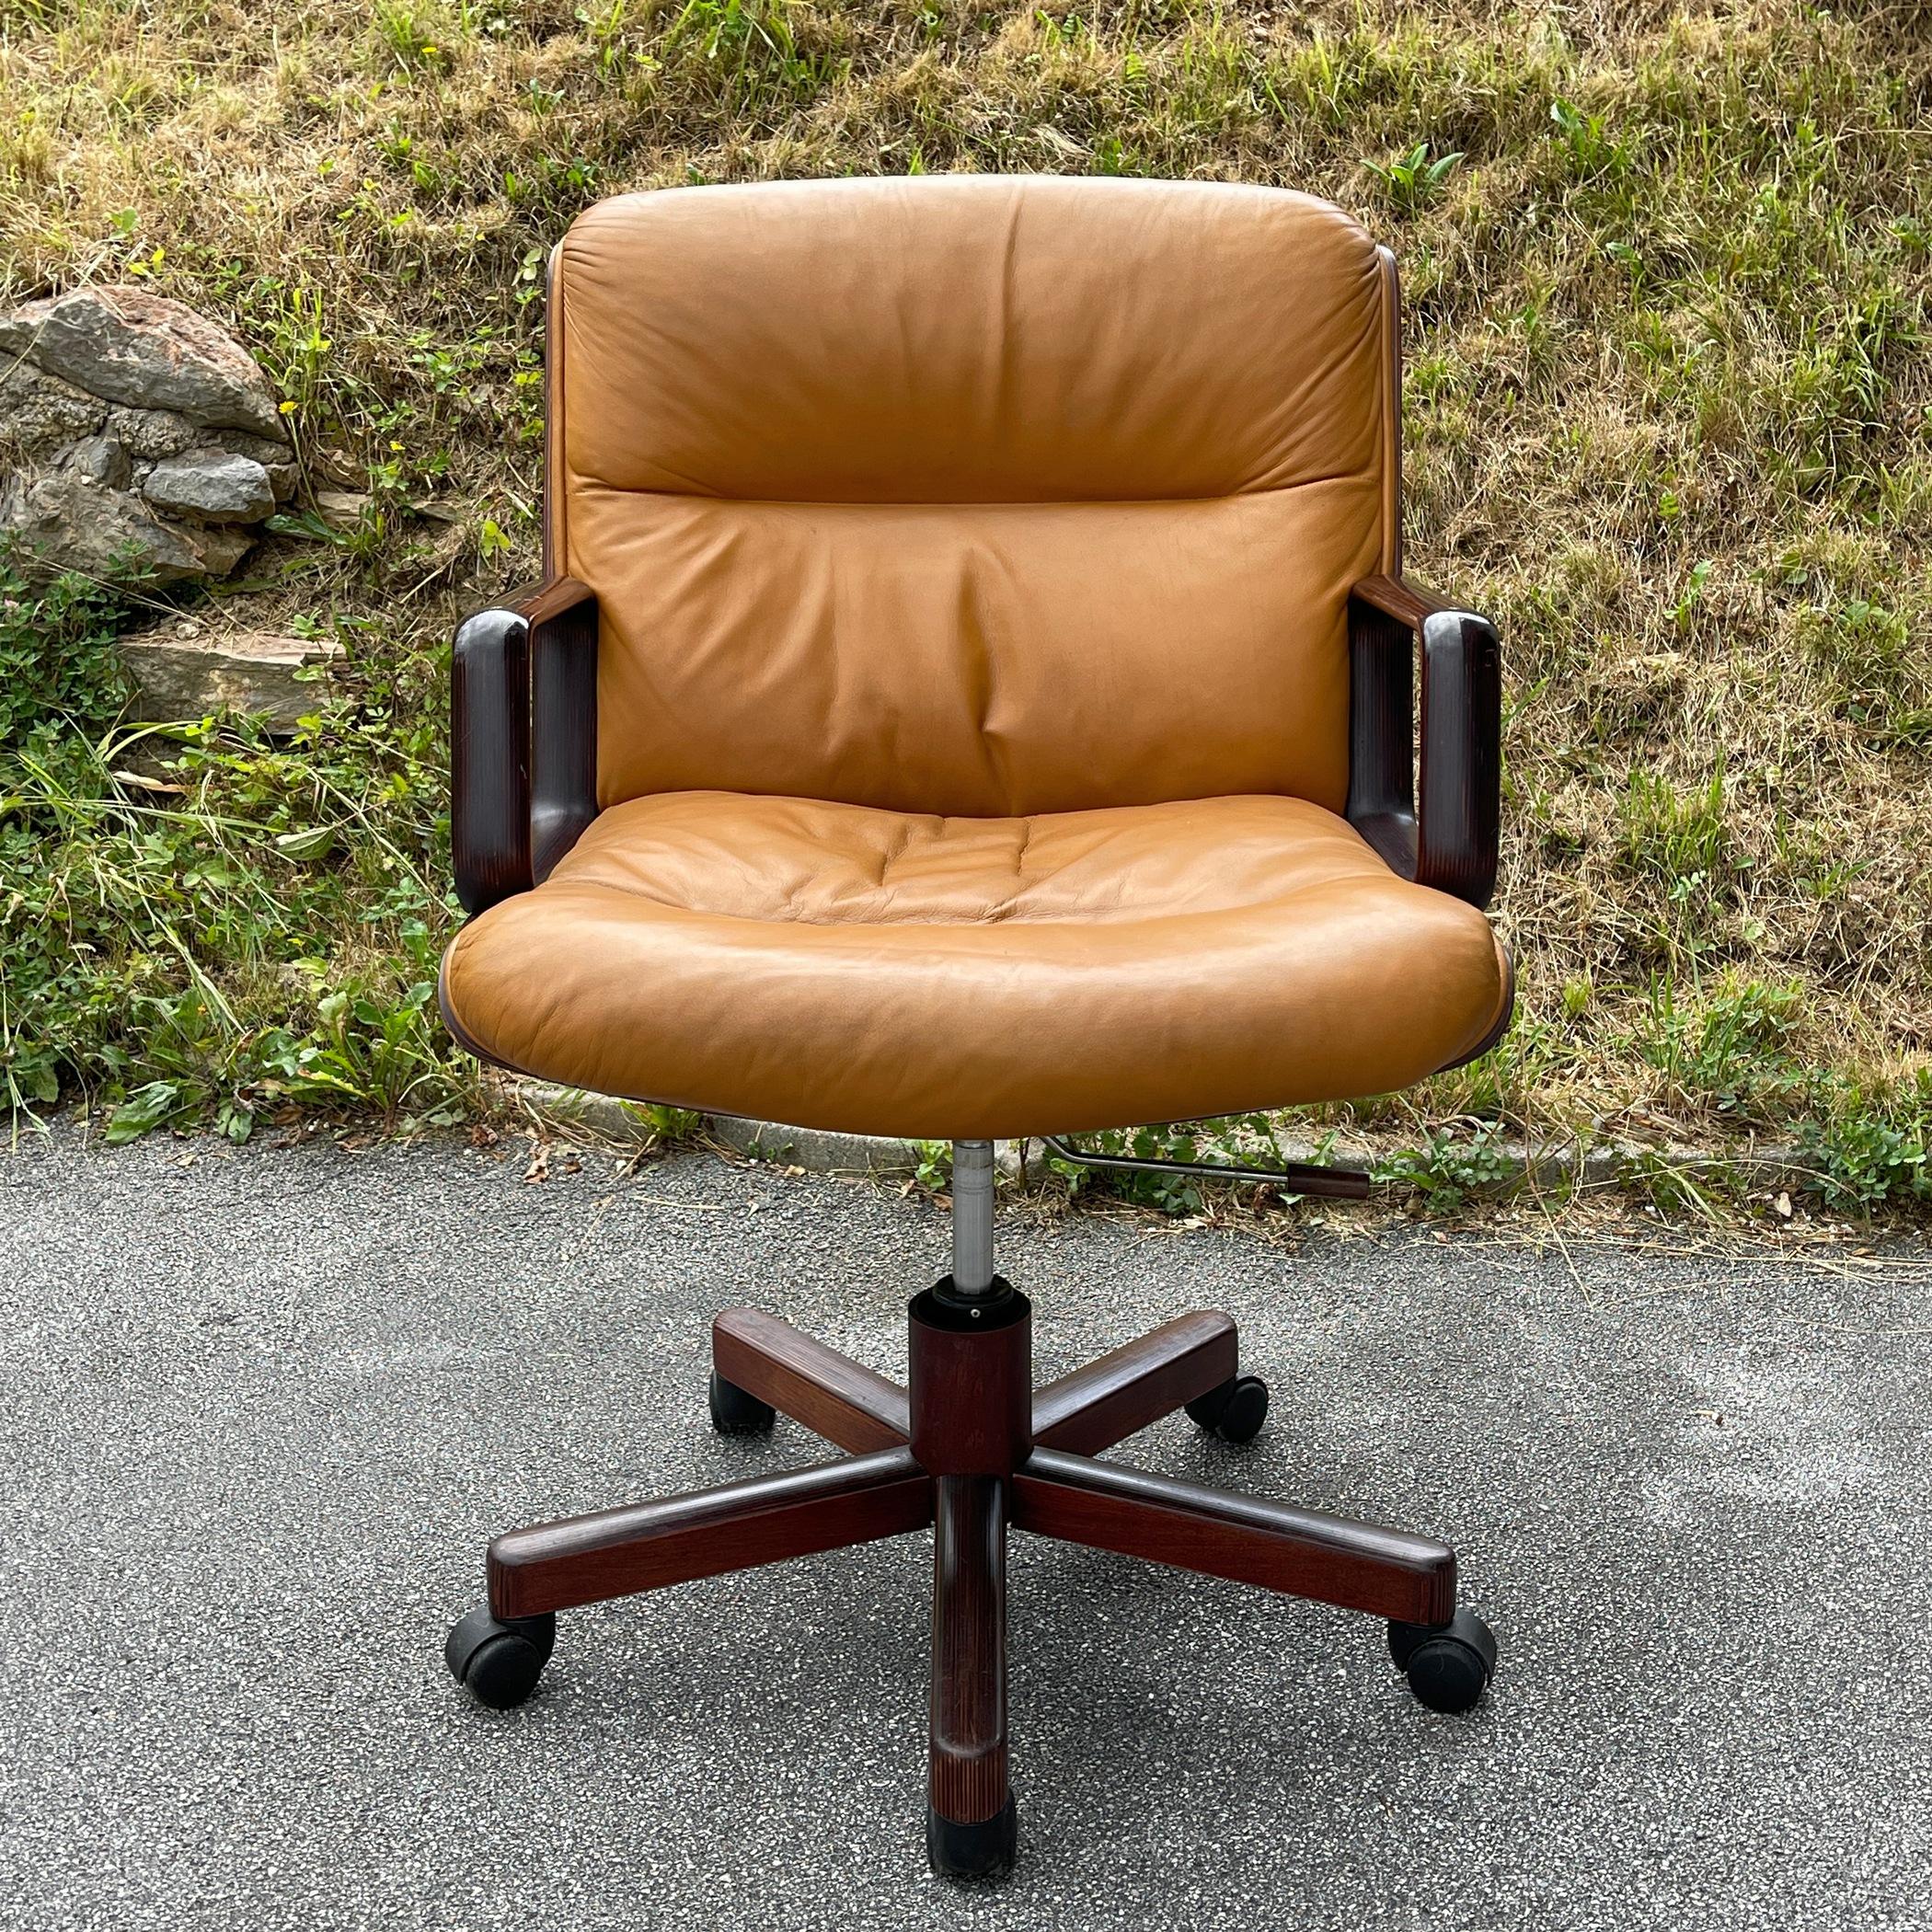 The mid-century swivel brown desk chair was made in Italy at the manufacture Vaghi in the 1970s. Vaghi was established in 1964 as “Tappezzeria dei Fratelli Vaghi”, an upholstery shop, and thanks to entrepreneurial attitude of its founders it soon